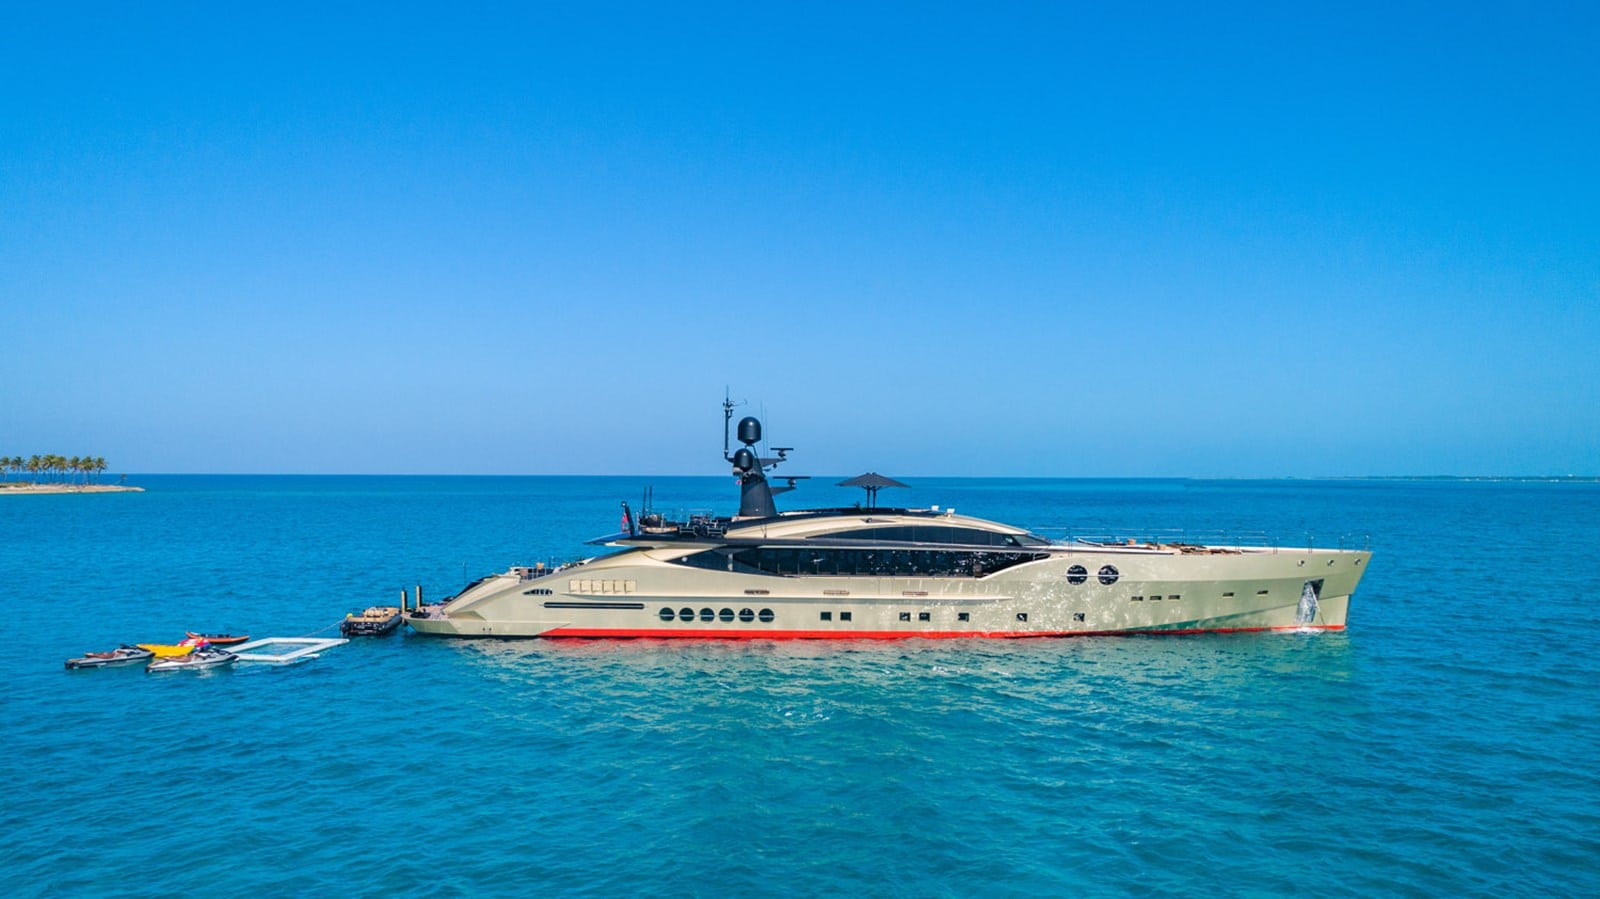 Yacht dealers in Miami